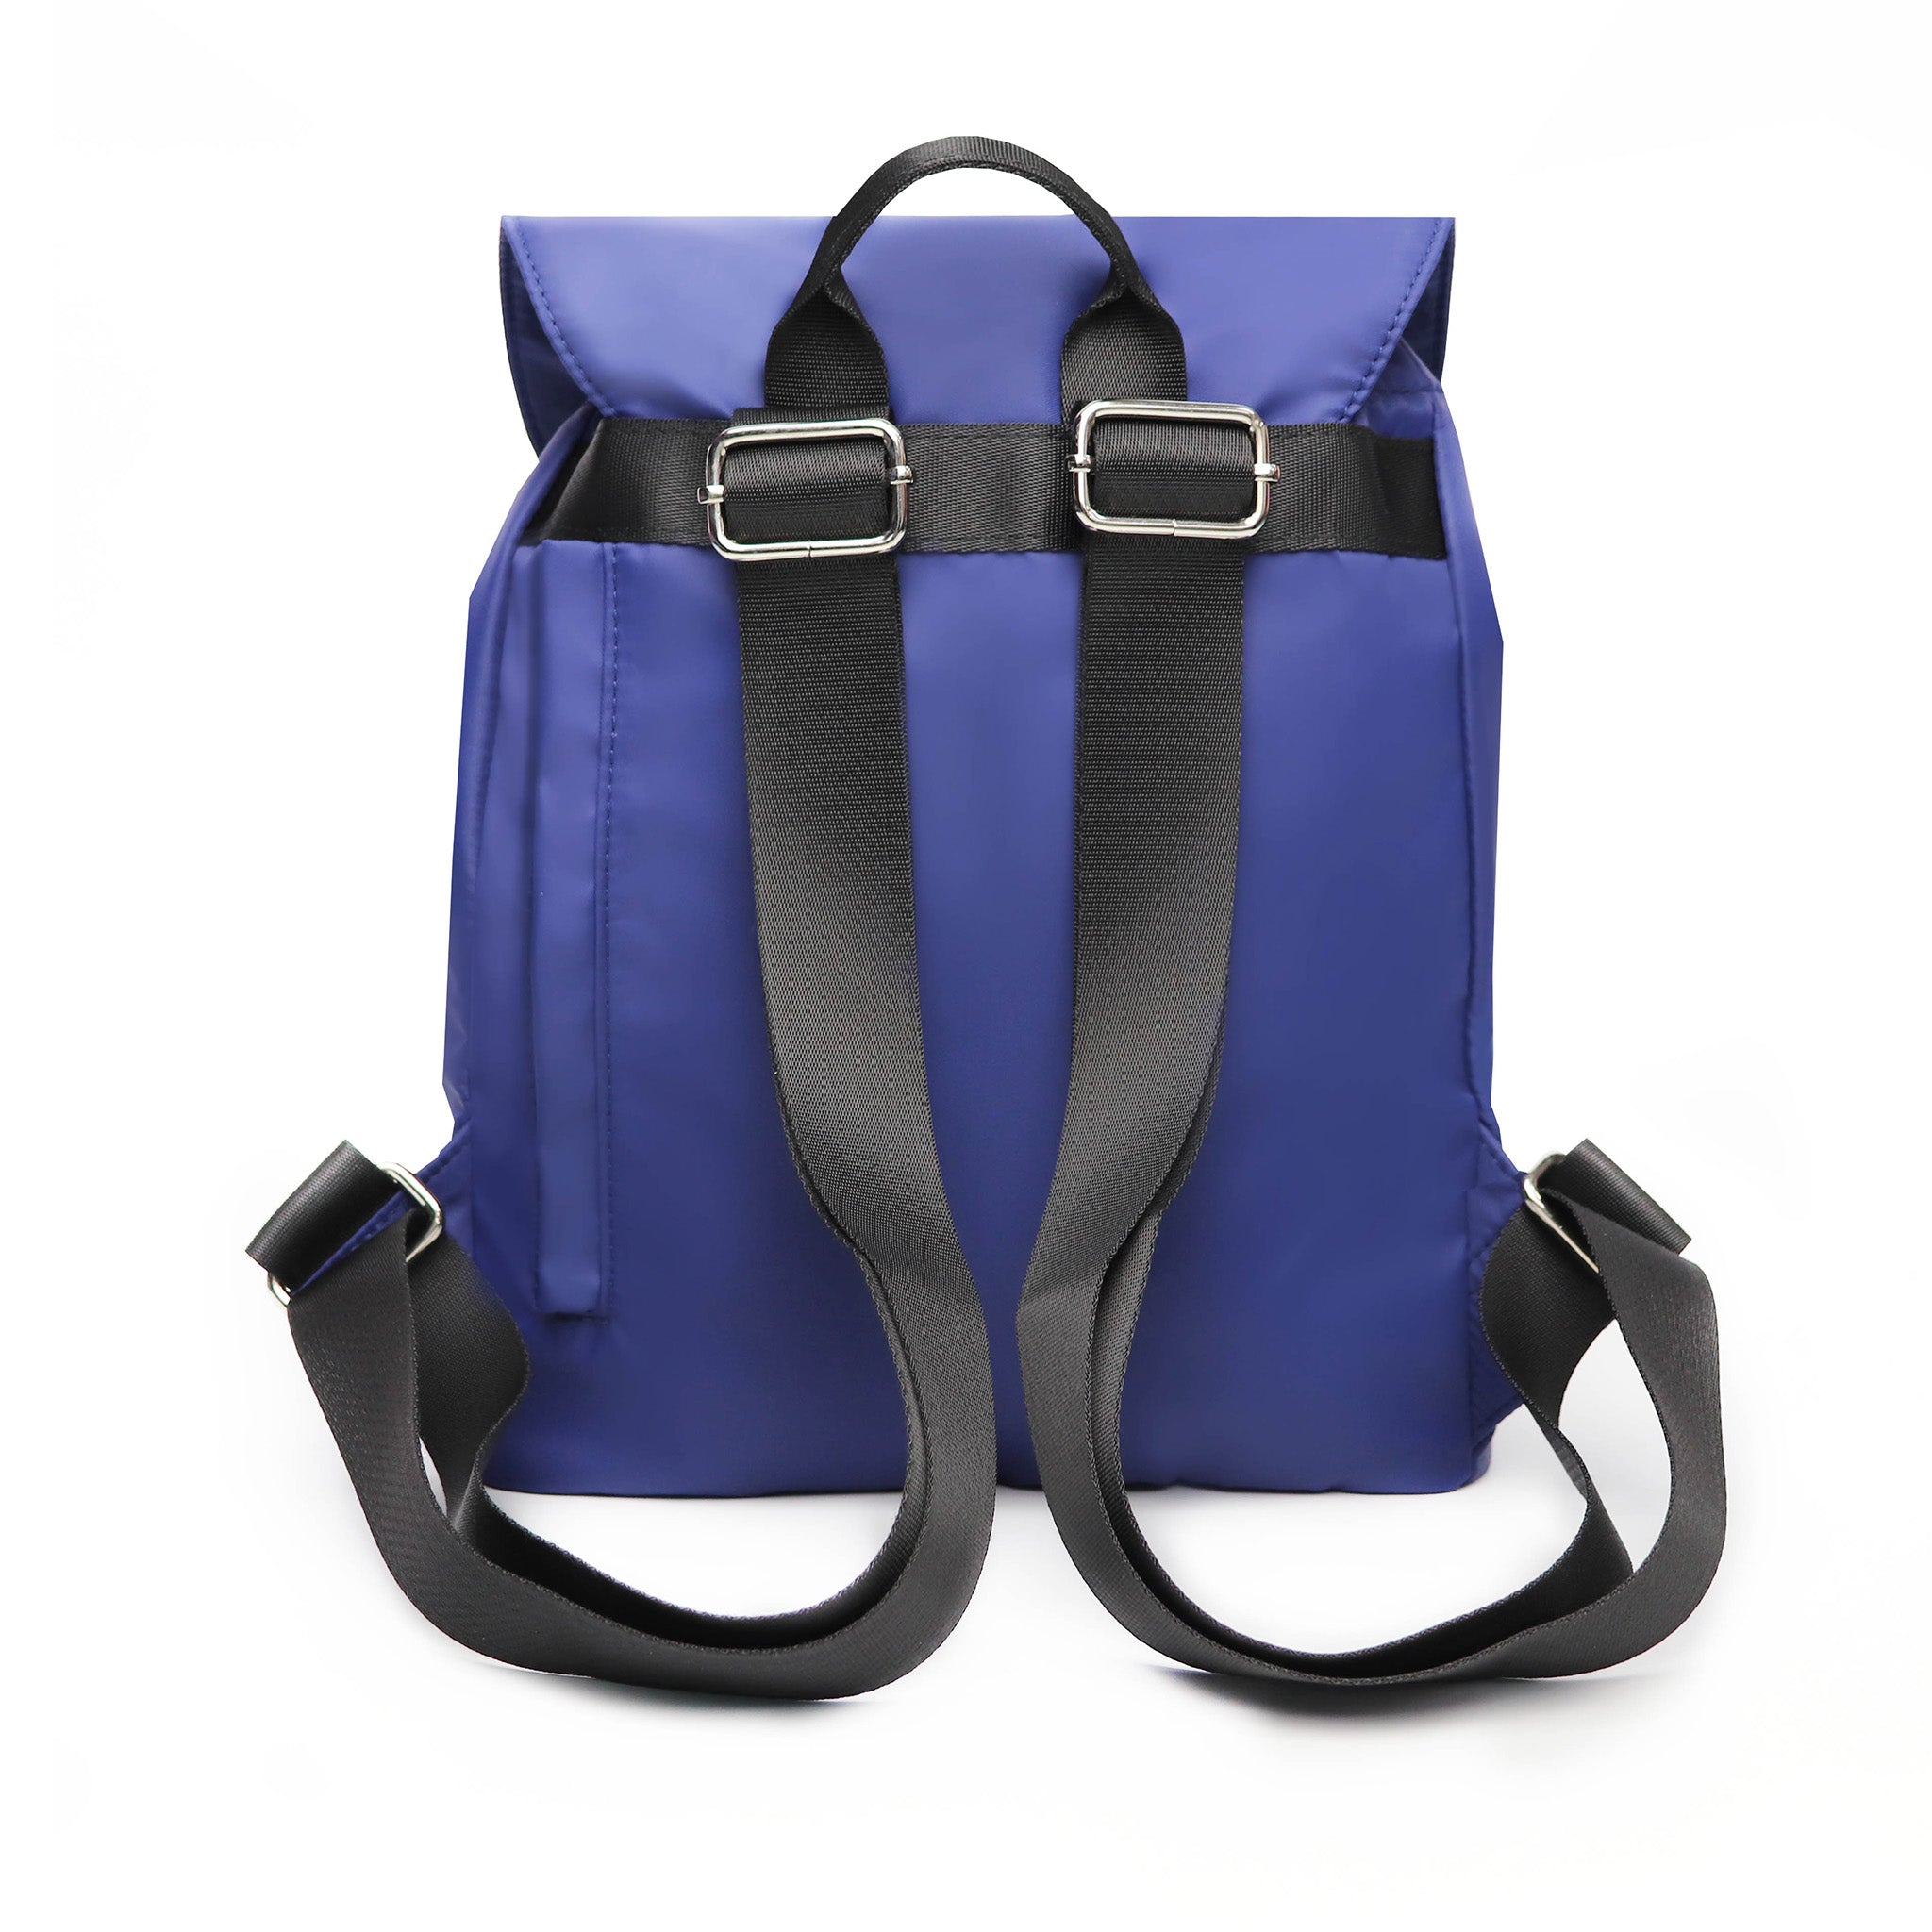 Simply Daypack